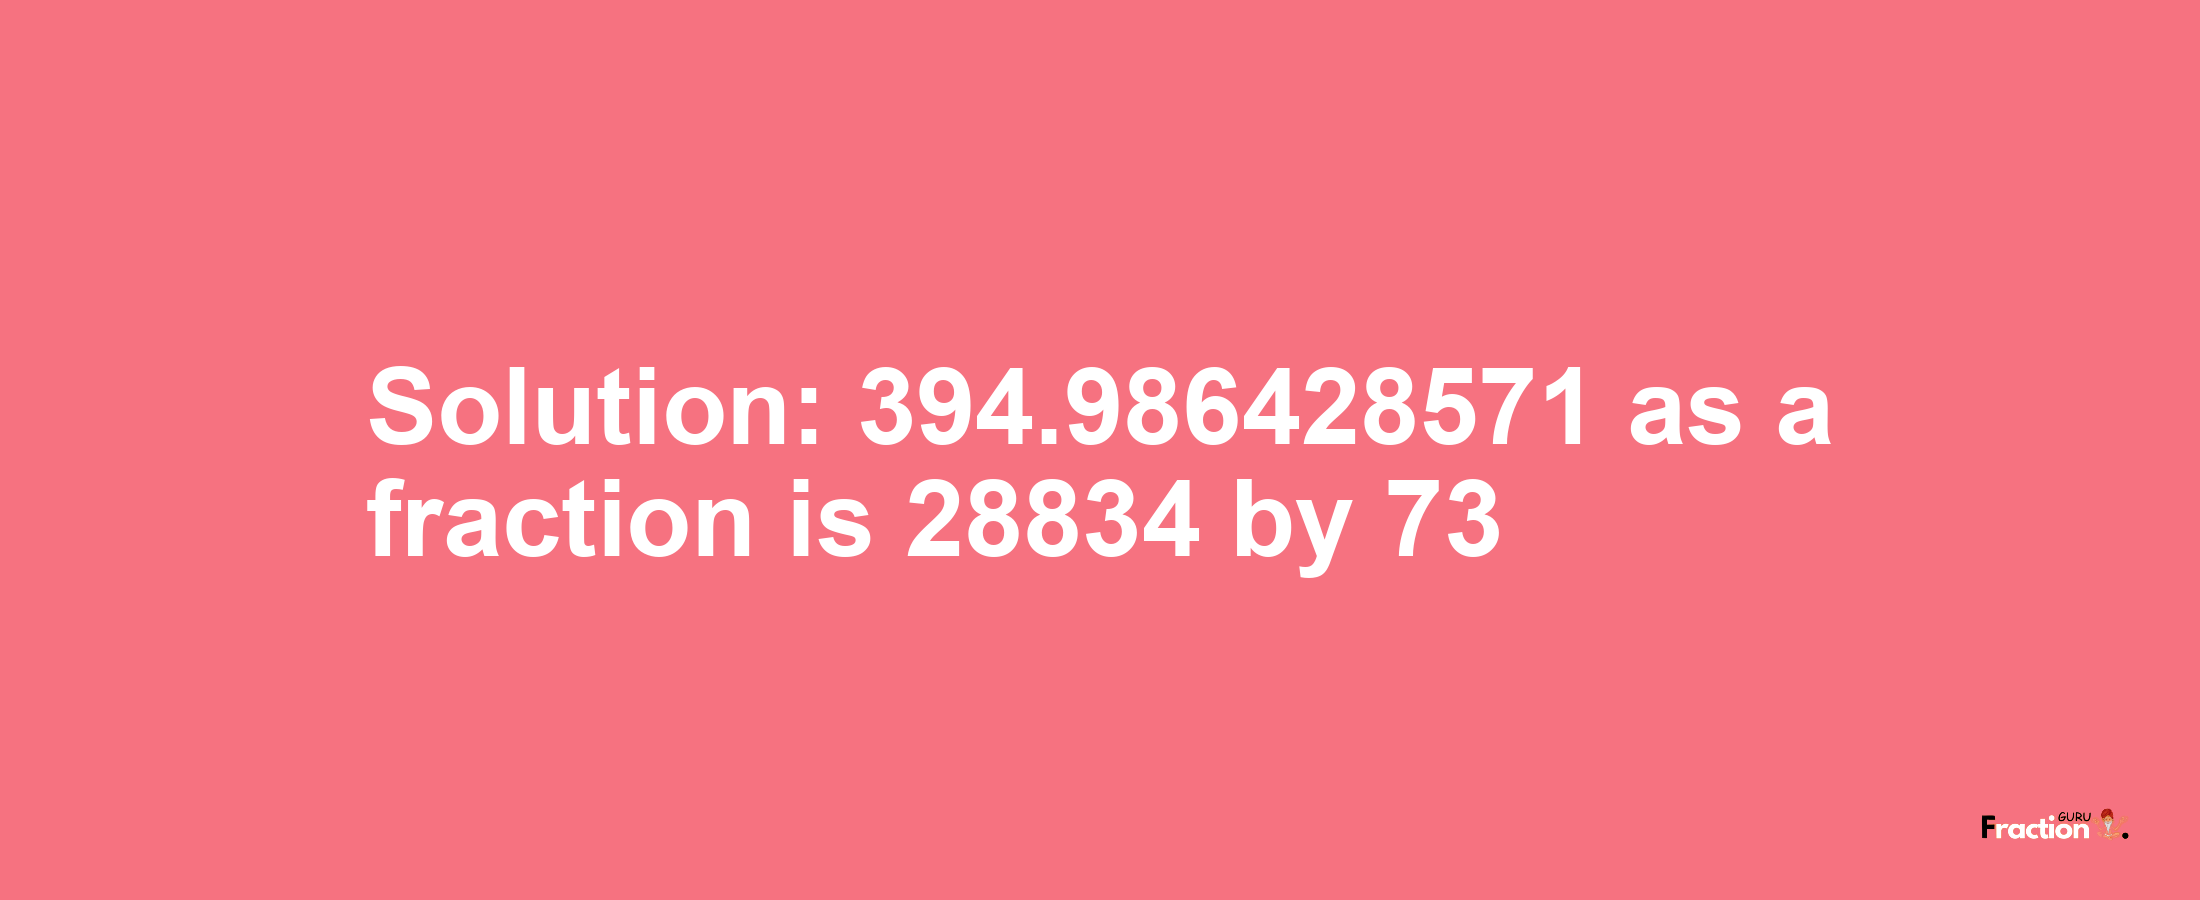 Solution:394.986428571 as a fraction is 28834/73